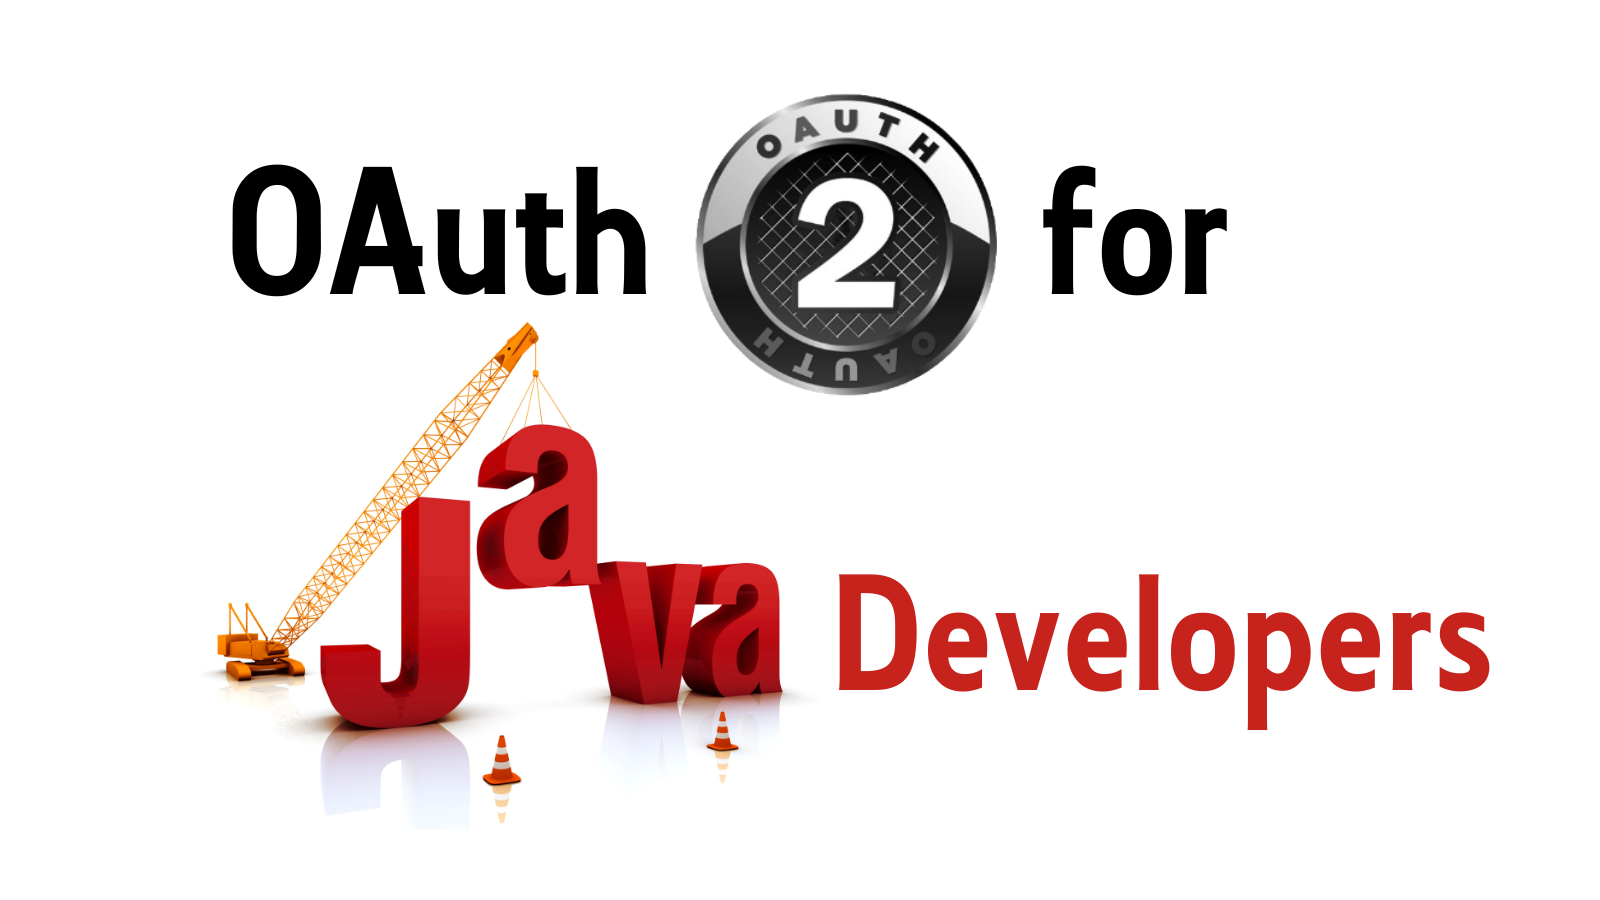 OAuth for Java Developers